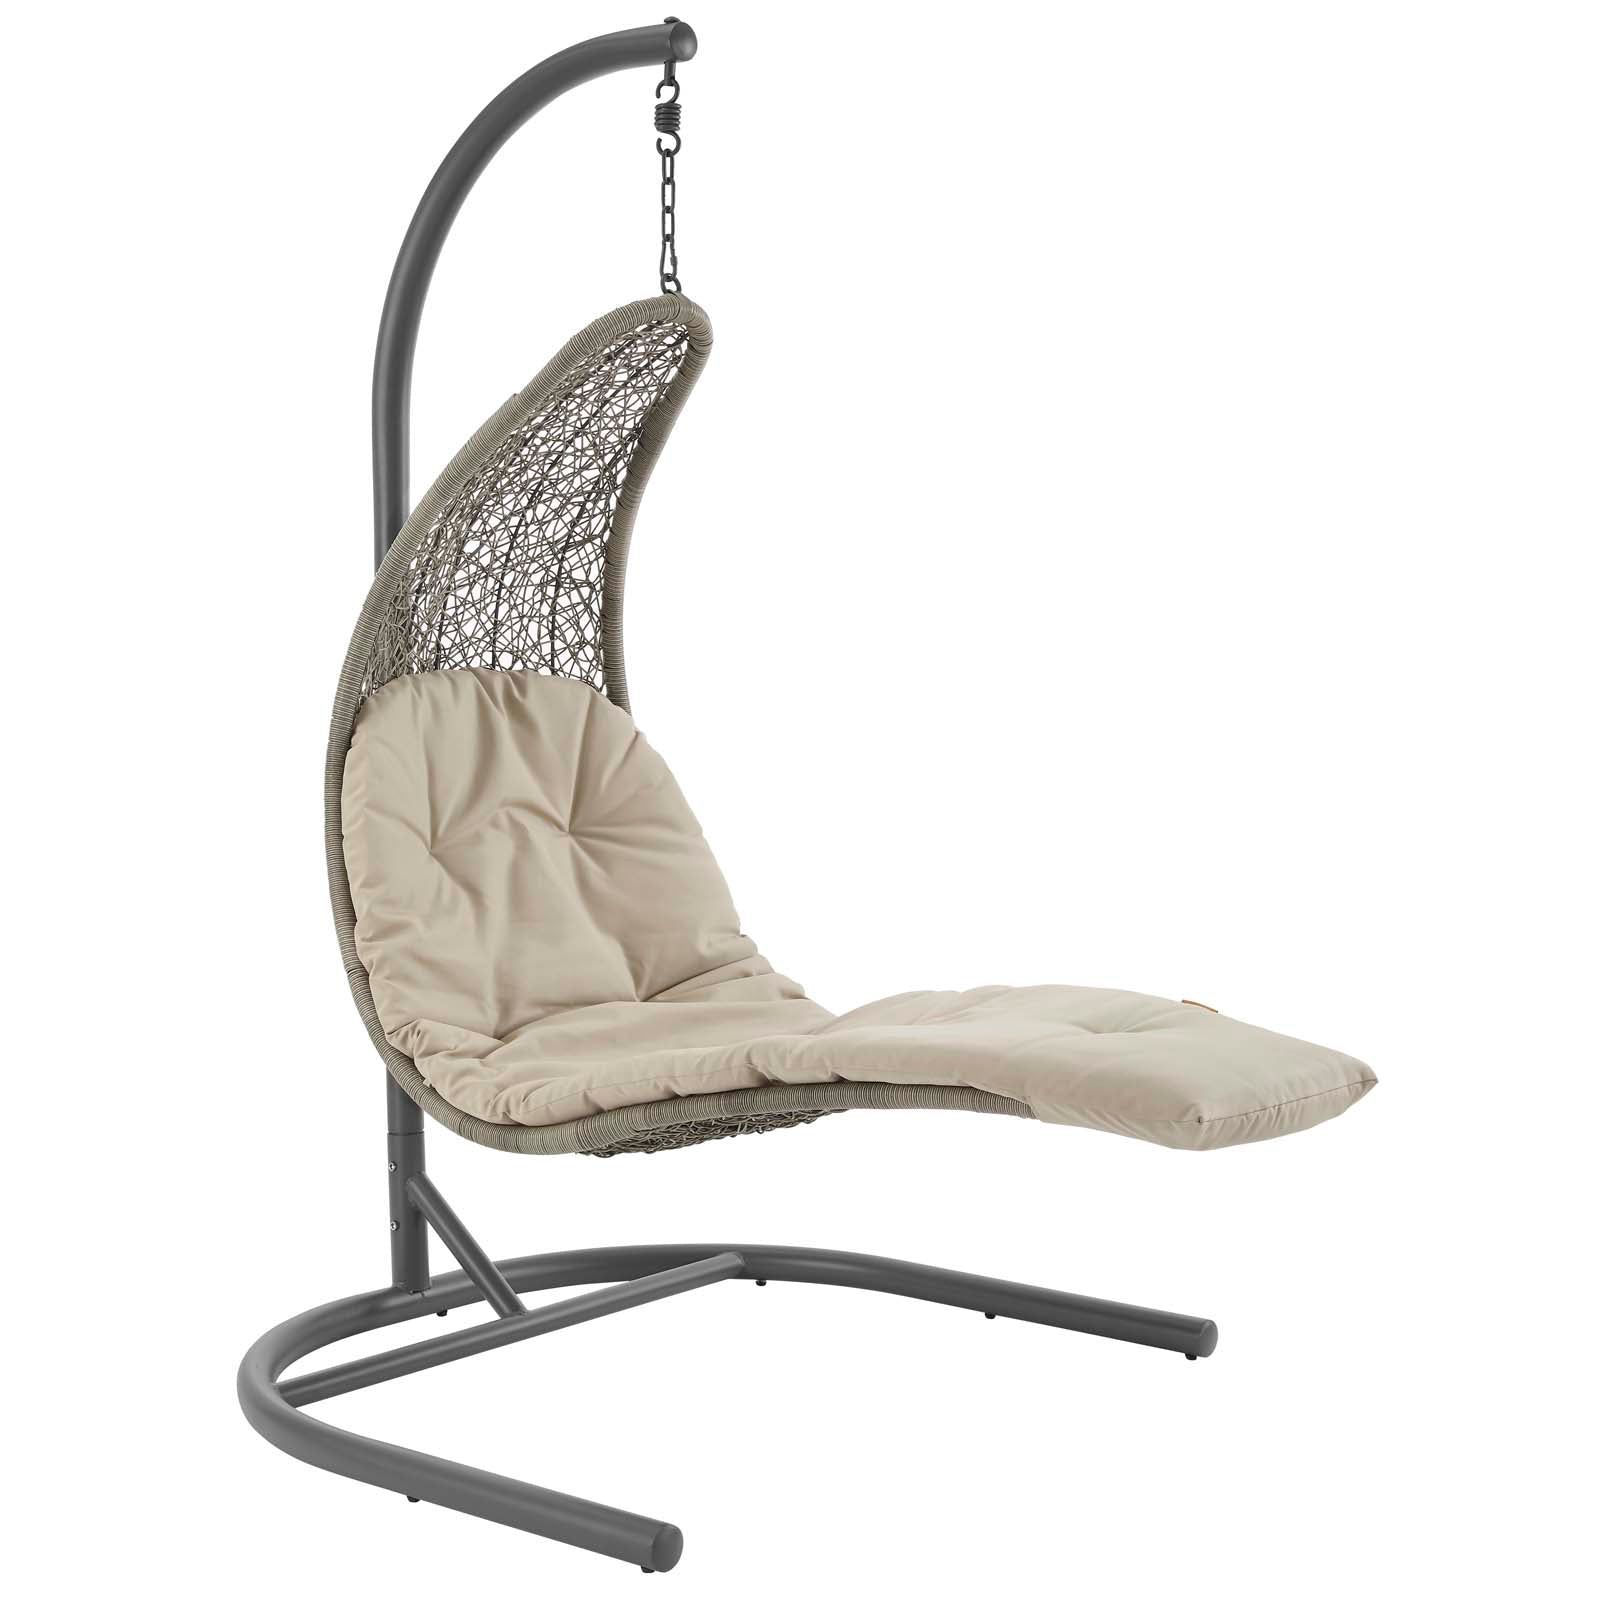 Modway Outdoor Swings - Landscape Hanging Chaise Lounge Outdoor Patio Swing Chair Light Gray Beige